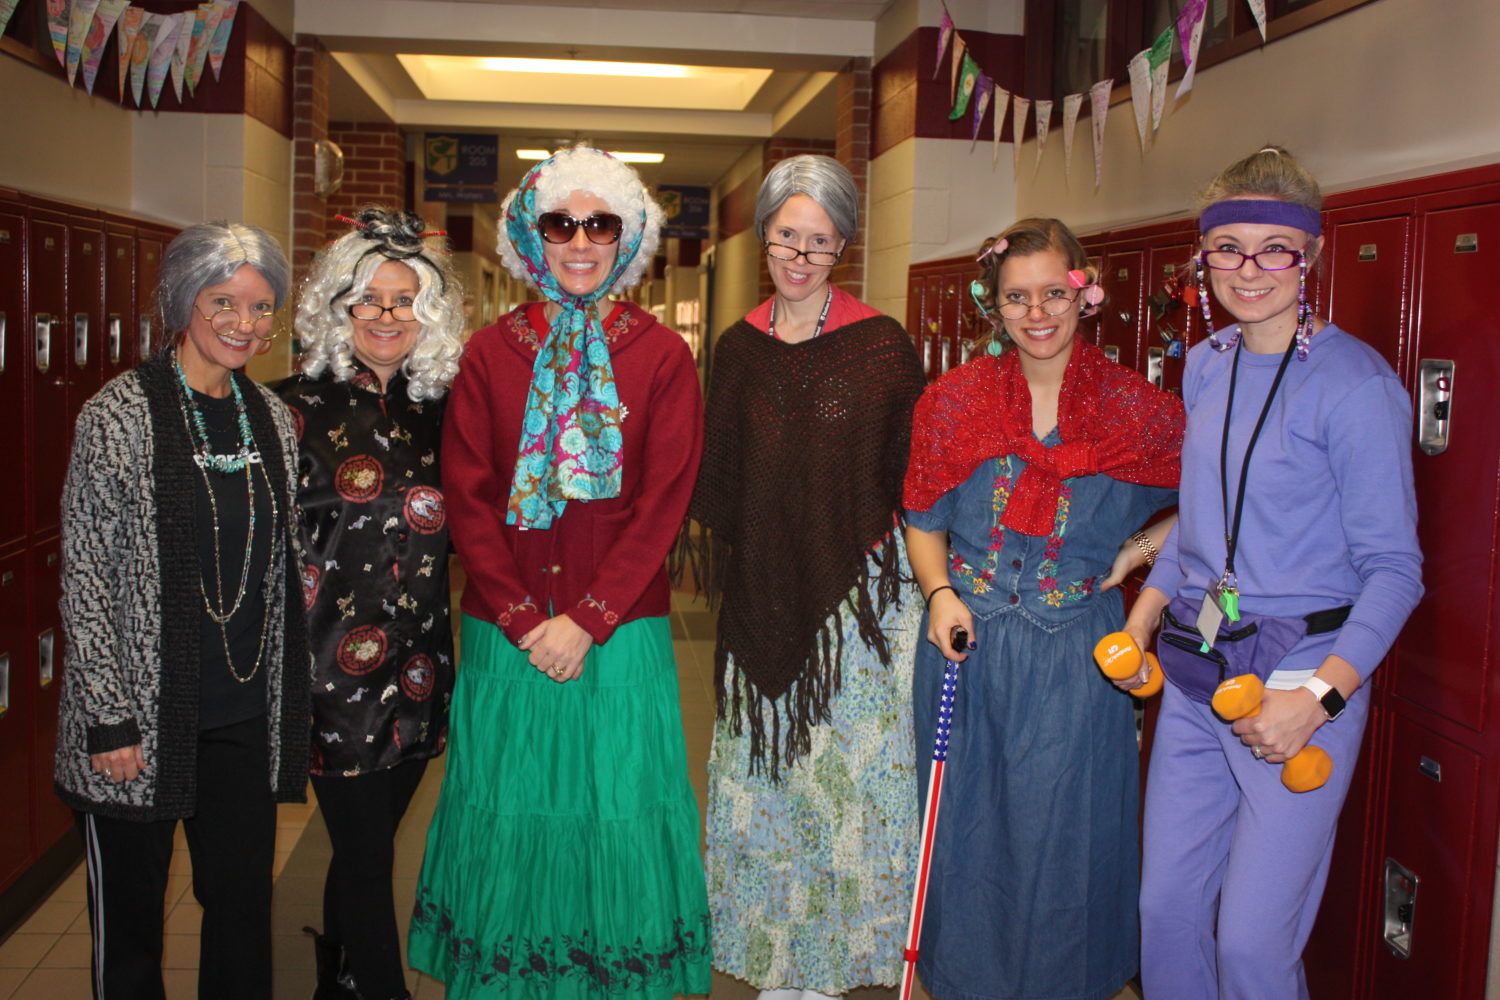 Tough first grade teachers dress the part to celebrate the 100th Day of School.